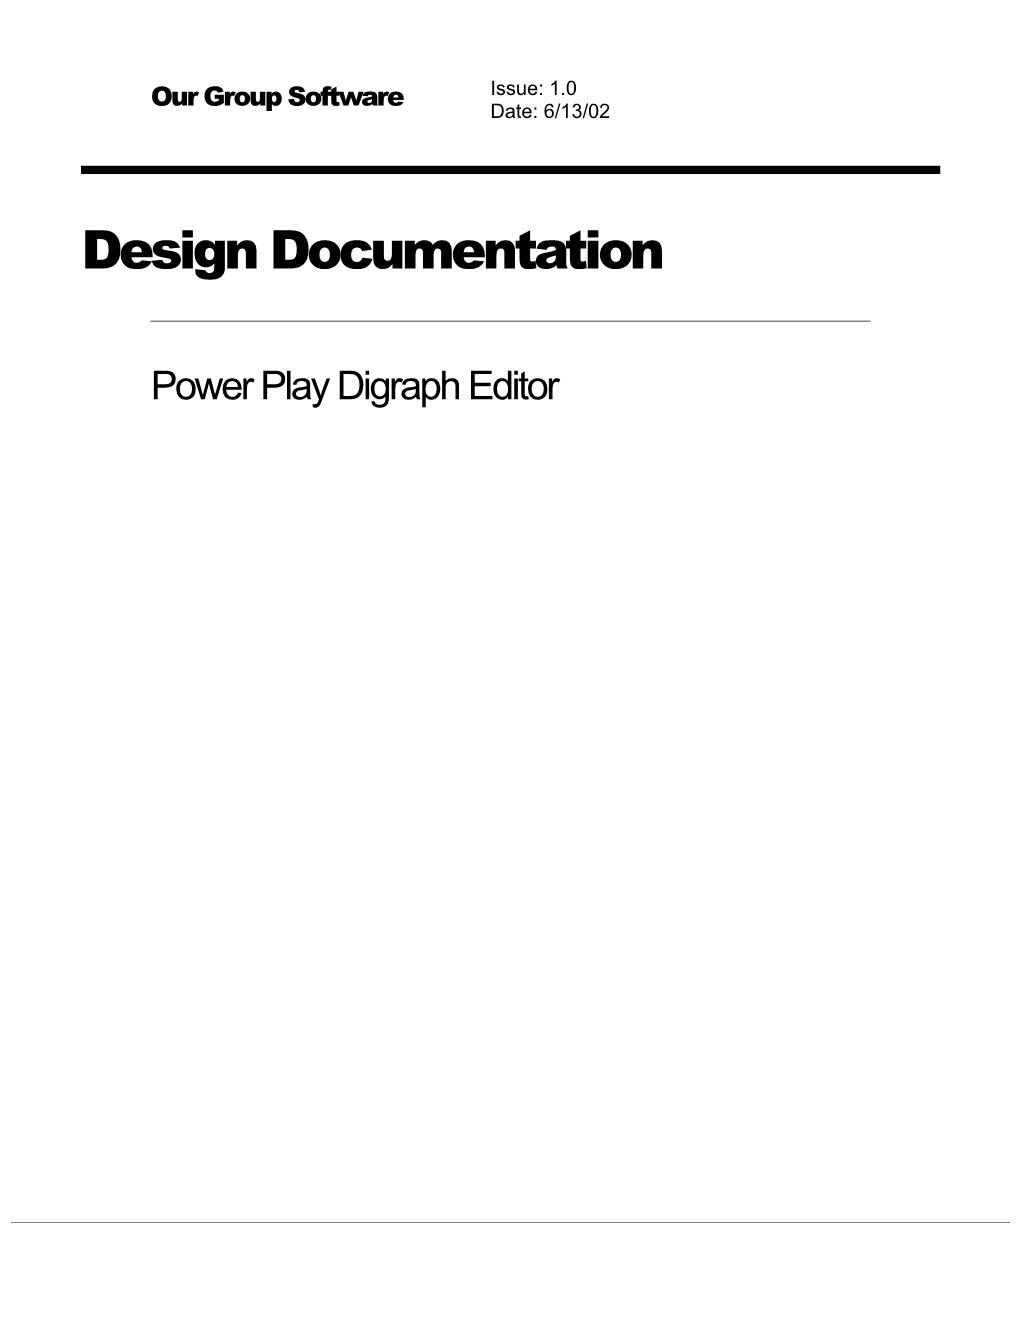 Power Play Digraph Editor Structure and Purpose